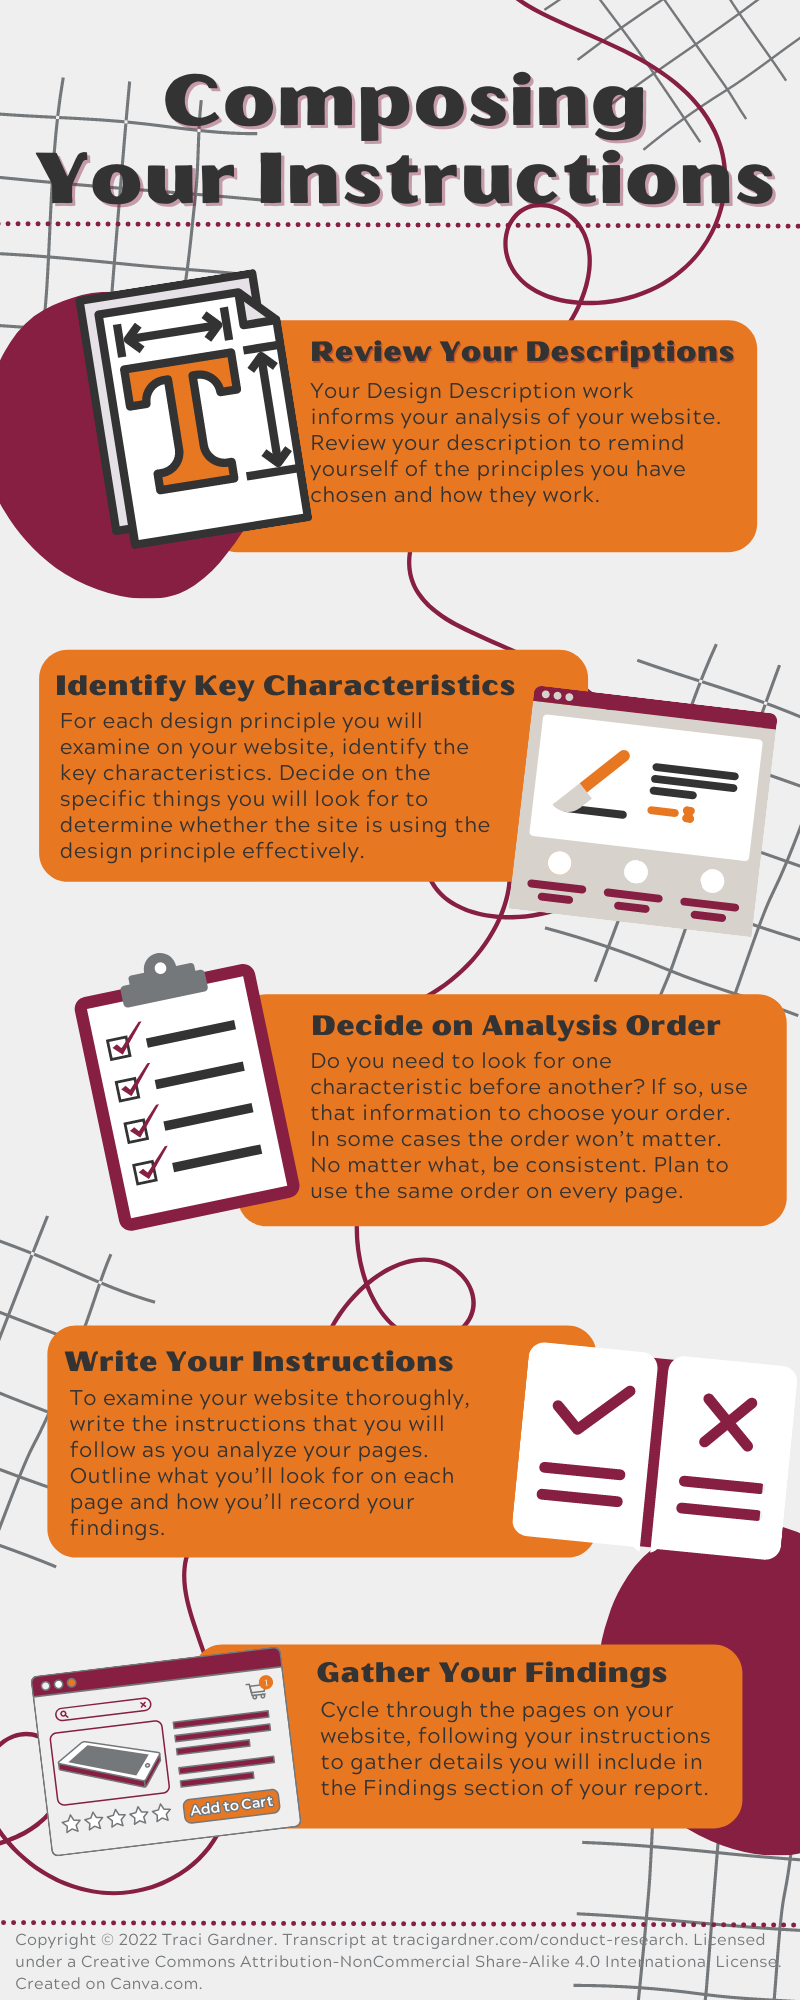 Infographic: Researching Your Report